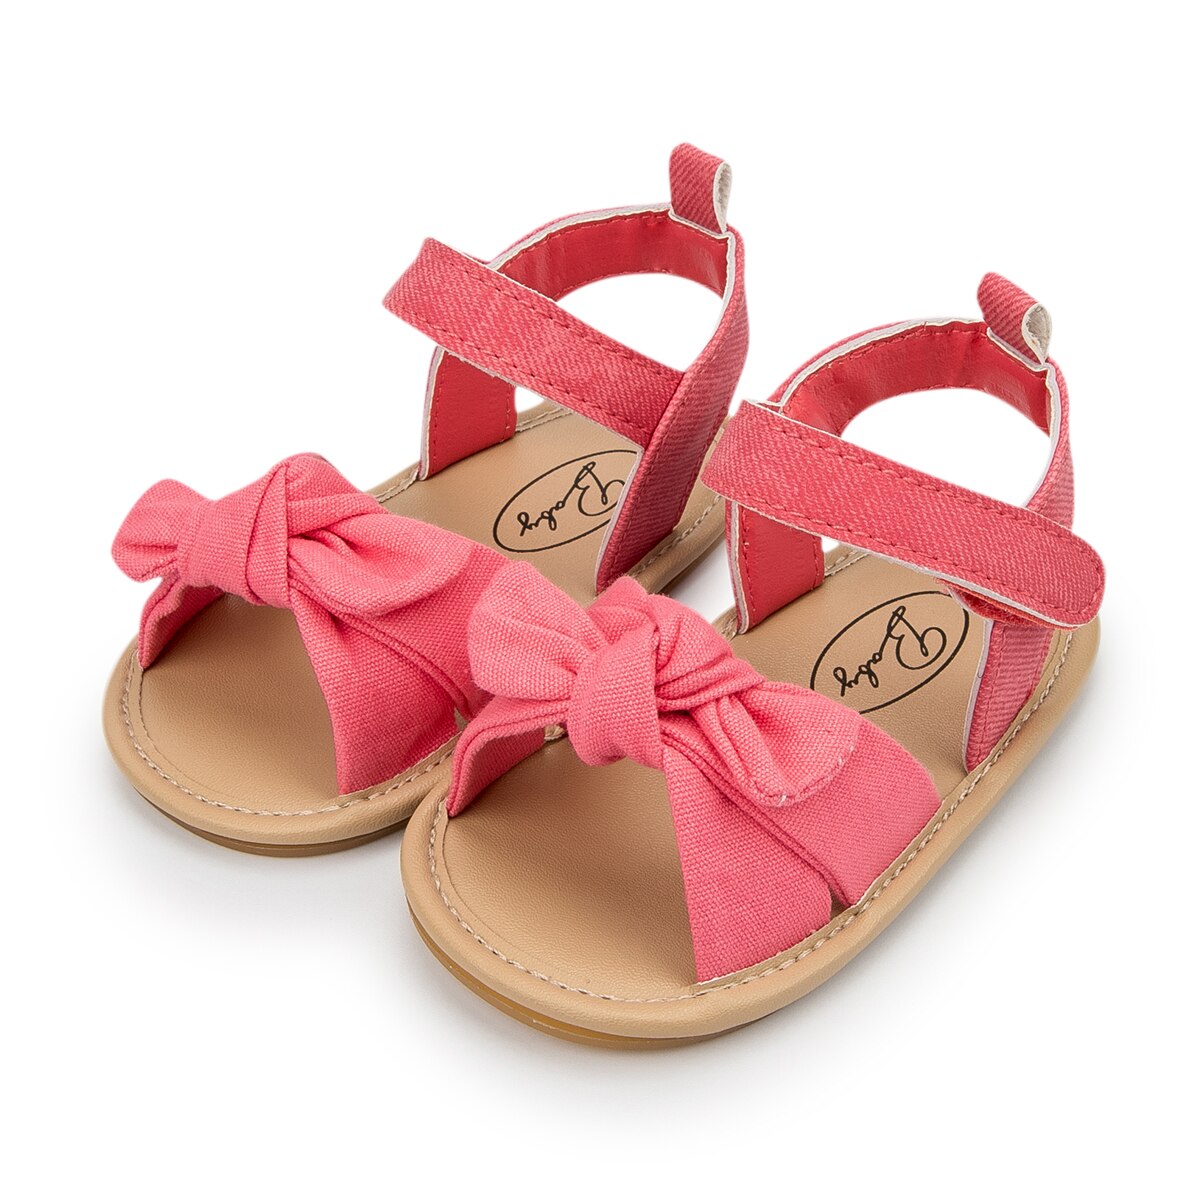 Summer Baby Girl Sandals Cute Bowknot Baby Girls Shoes Toddler Infant Flat Soft-Sole Summer Sandals Non-slip Shoes Crib